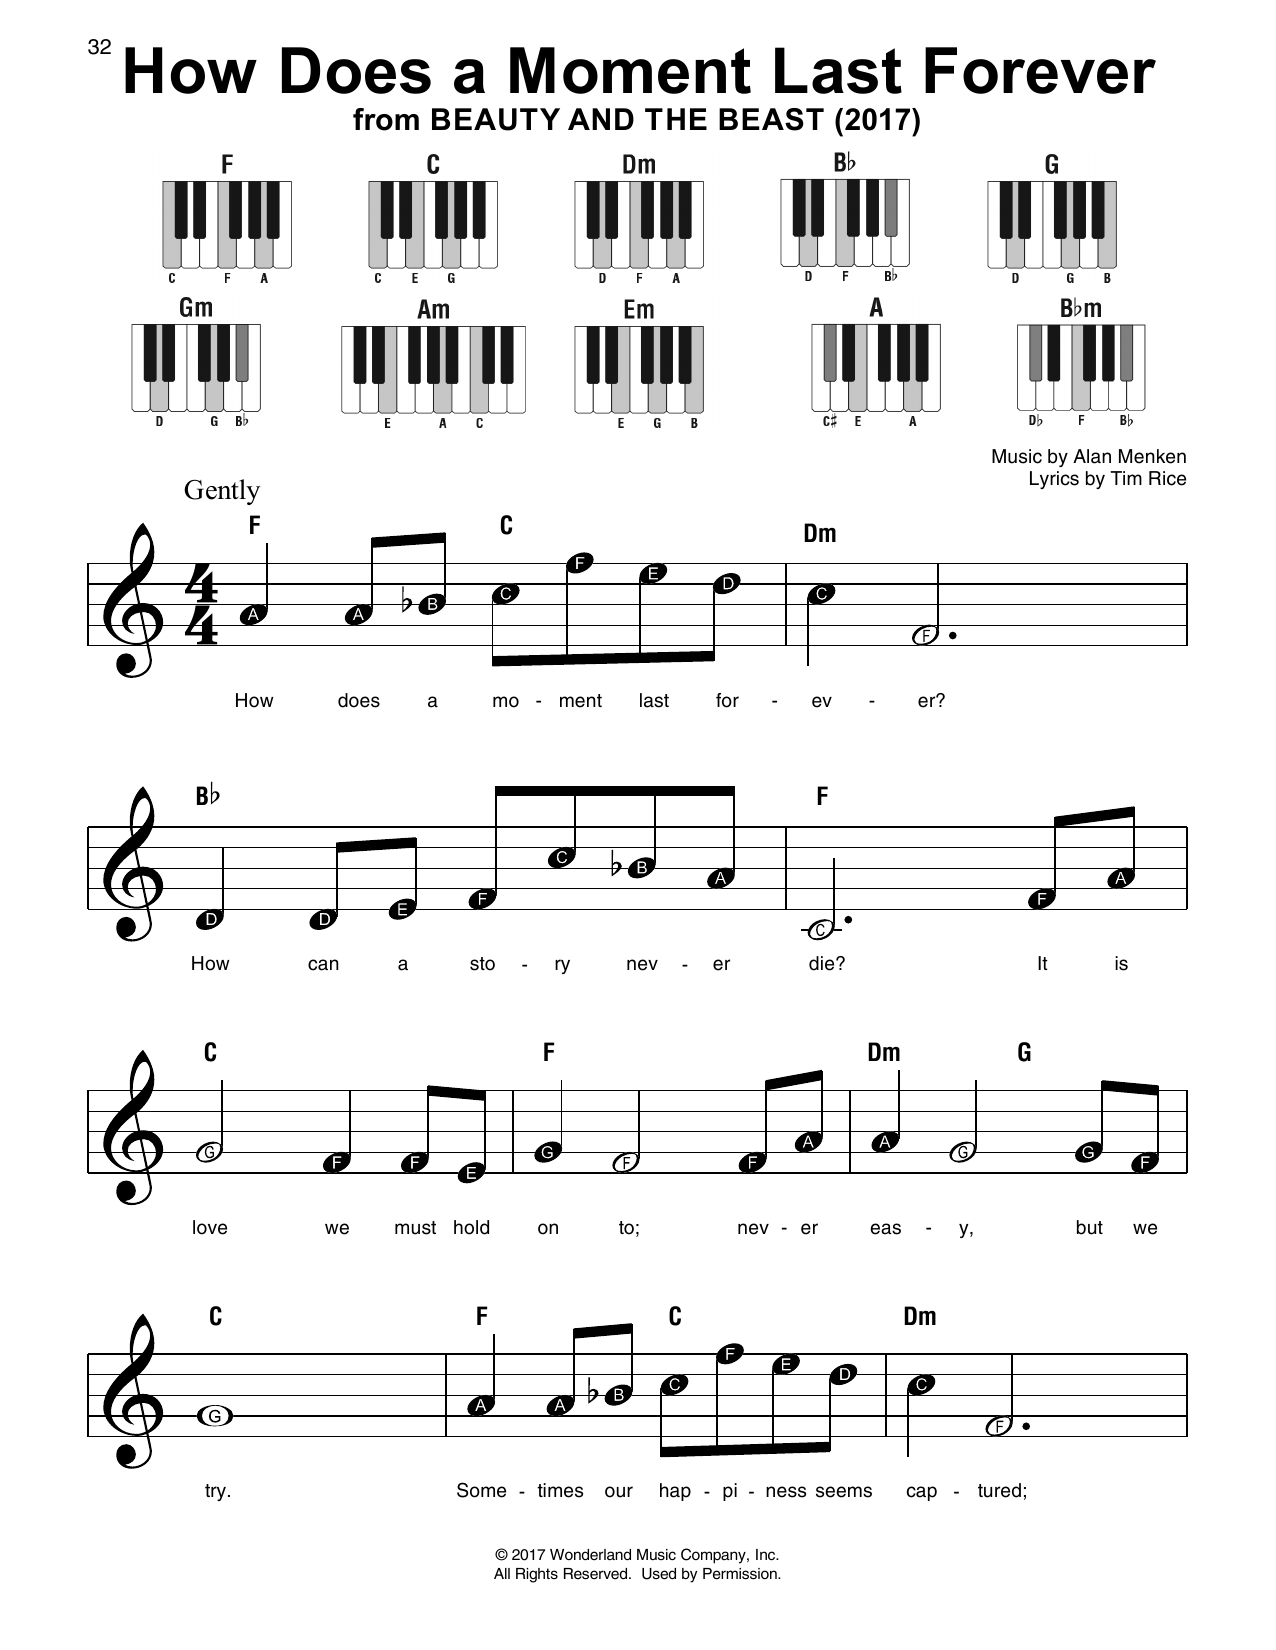 Celine Dion How Does A Moment Last Forever (from Beauty And The Beast) sheet music notes and chords. Download Printable PDF.